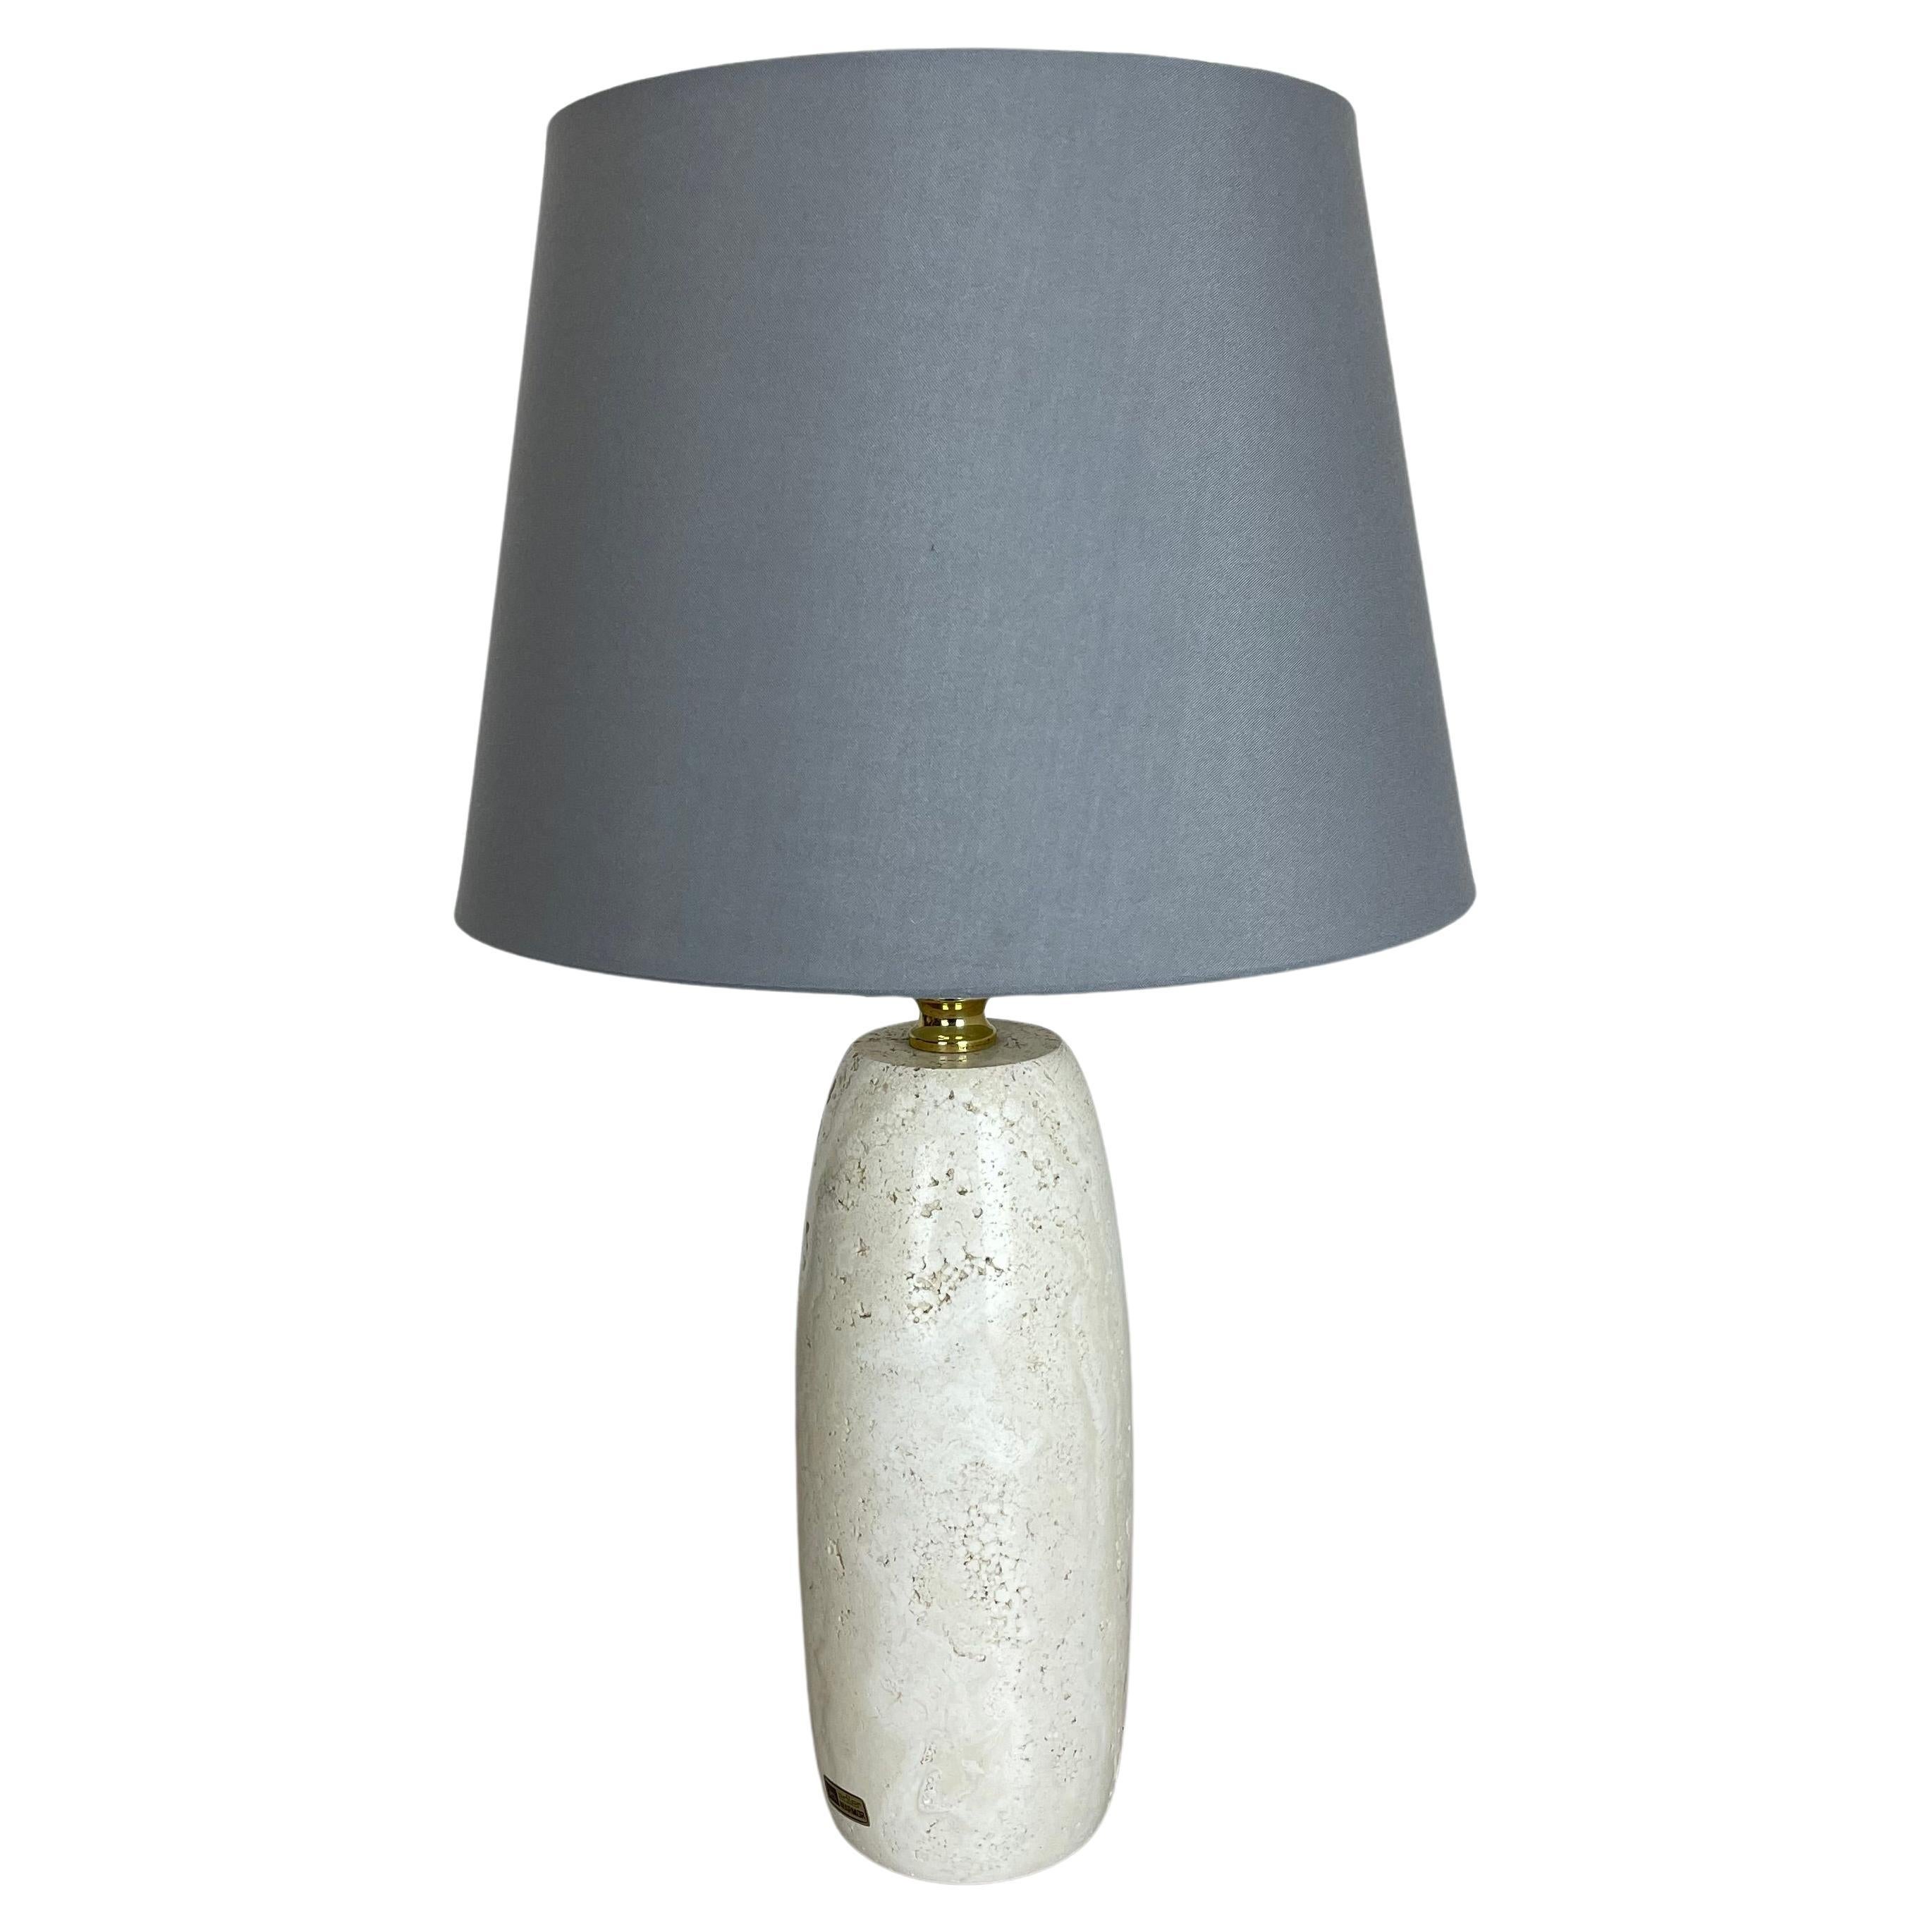 6.4kg Travertine Marble Fratelli Mannelli Style Table Light Base, Italy, 1970s